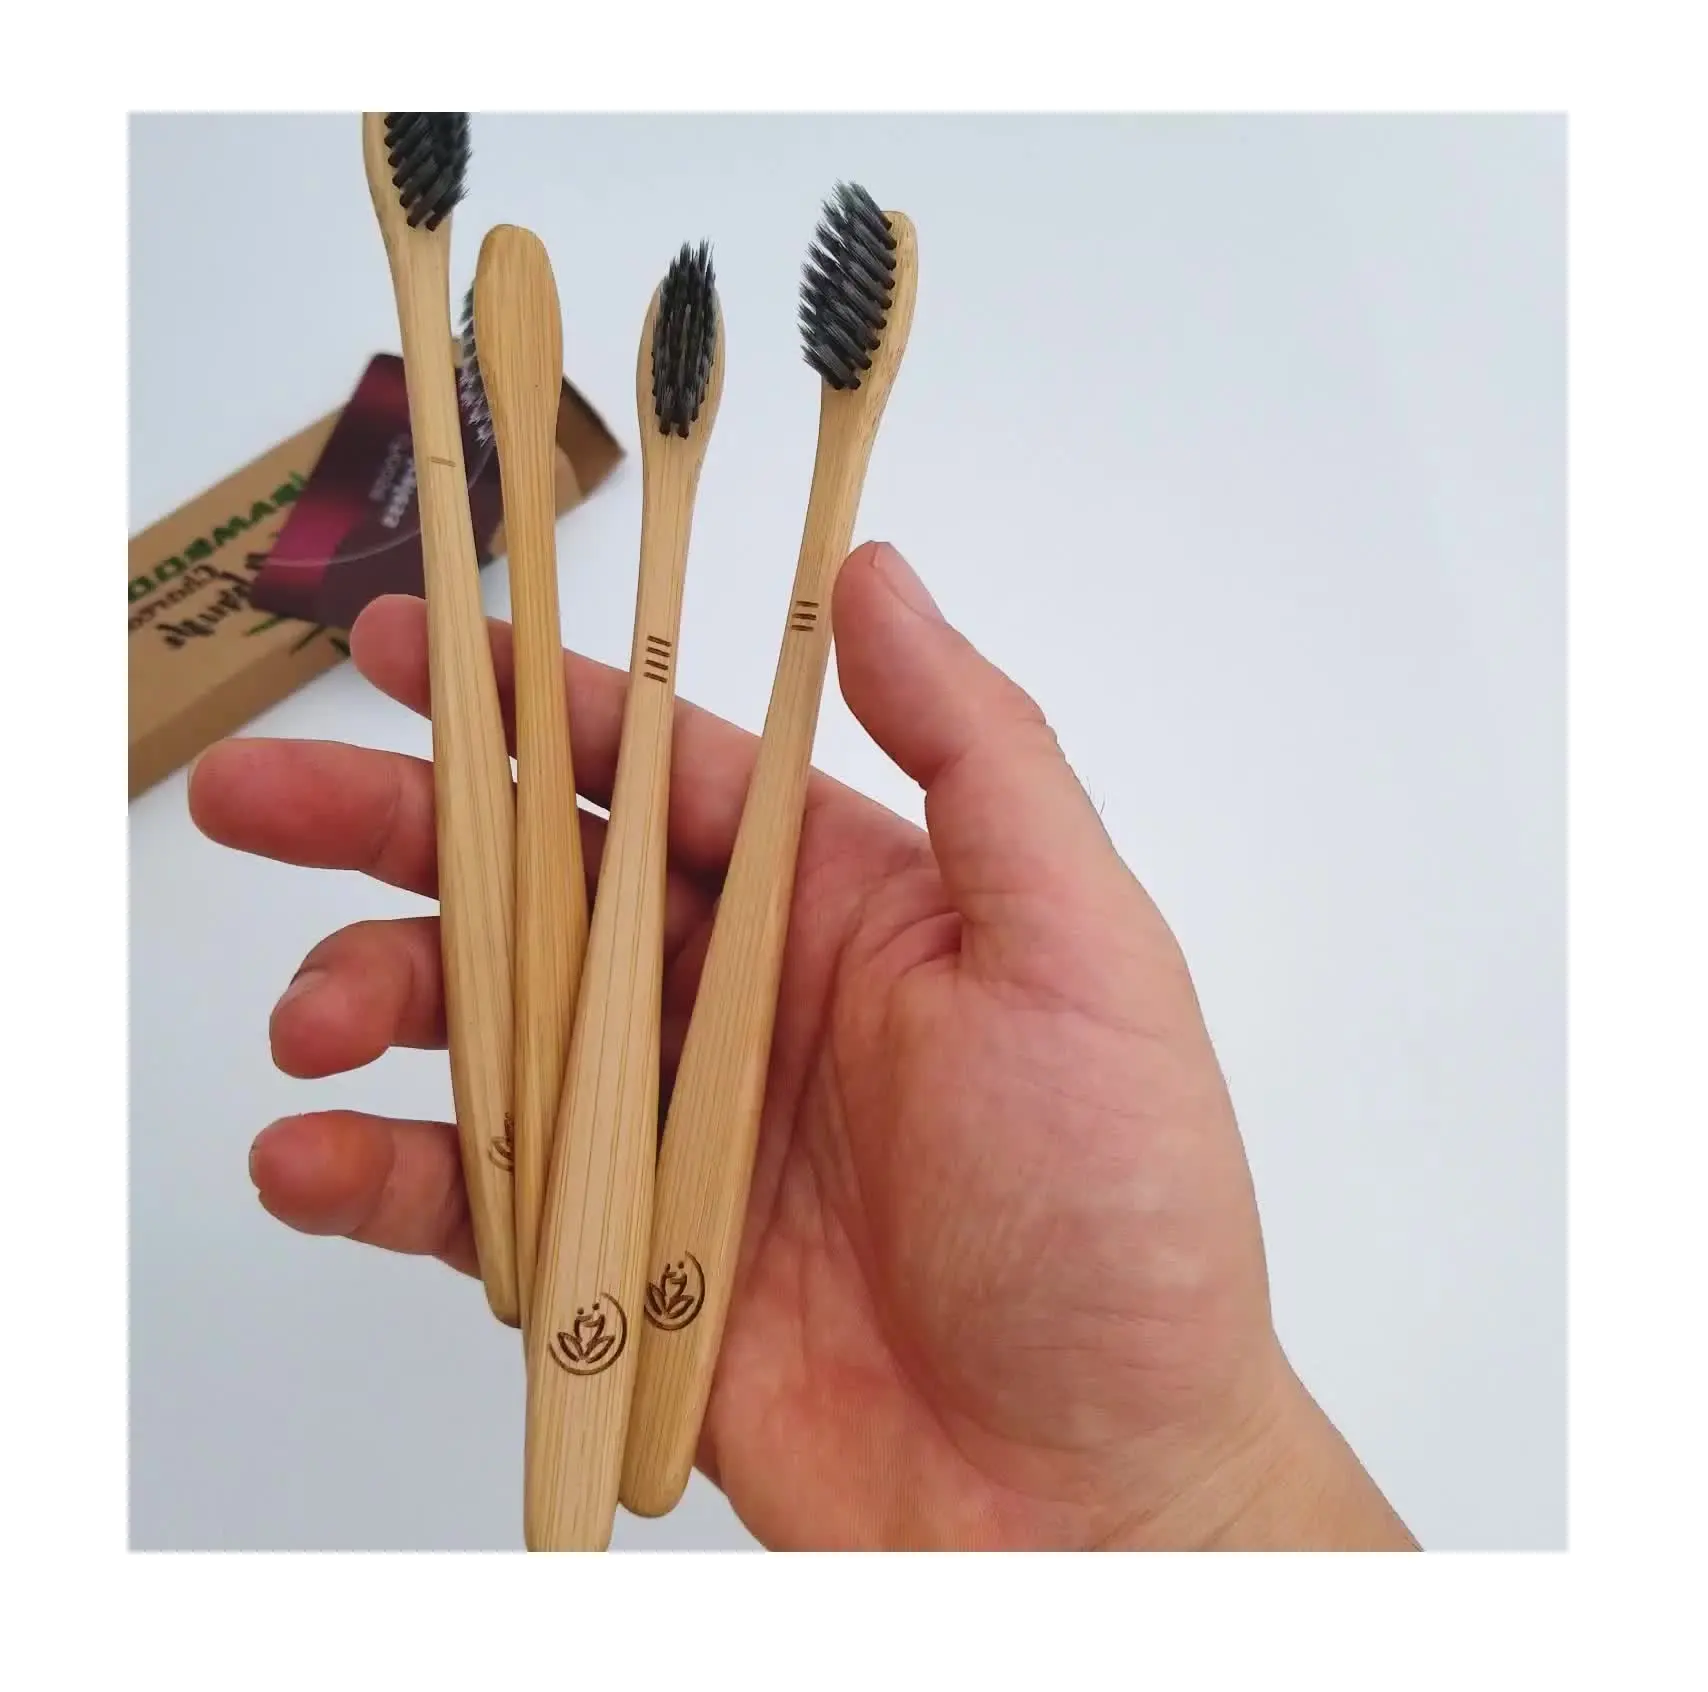 Disposable bamboo toothbrush for hotel - Natural bamboo handle toothbrush - Compostable wooden tooth brush 99GD